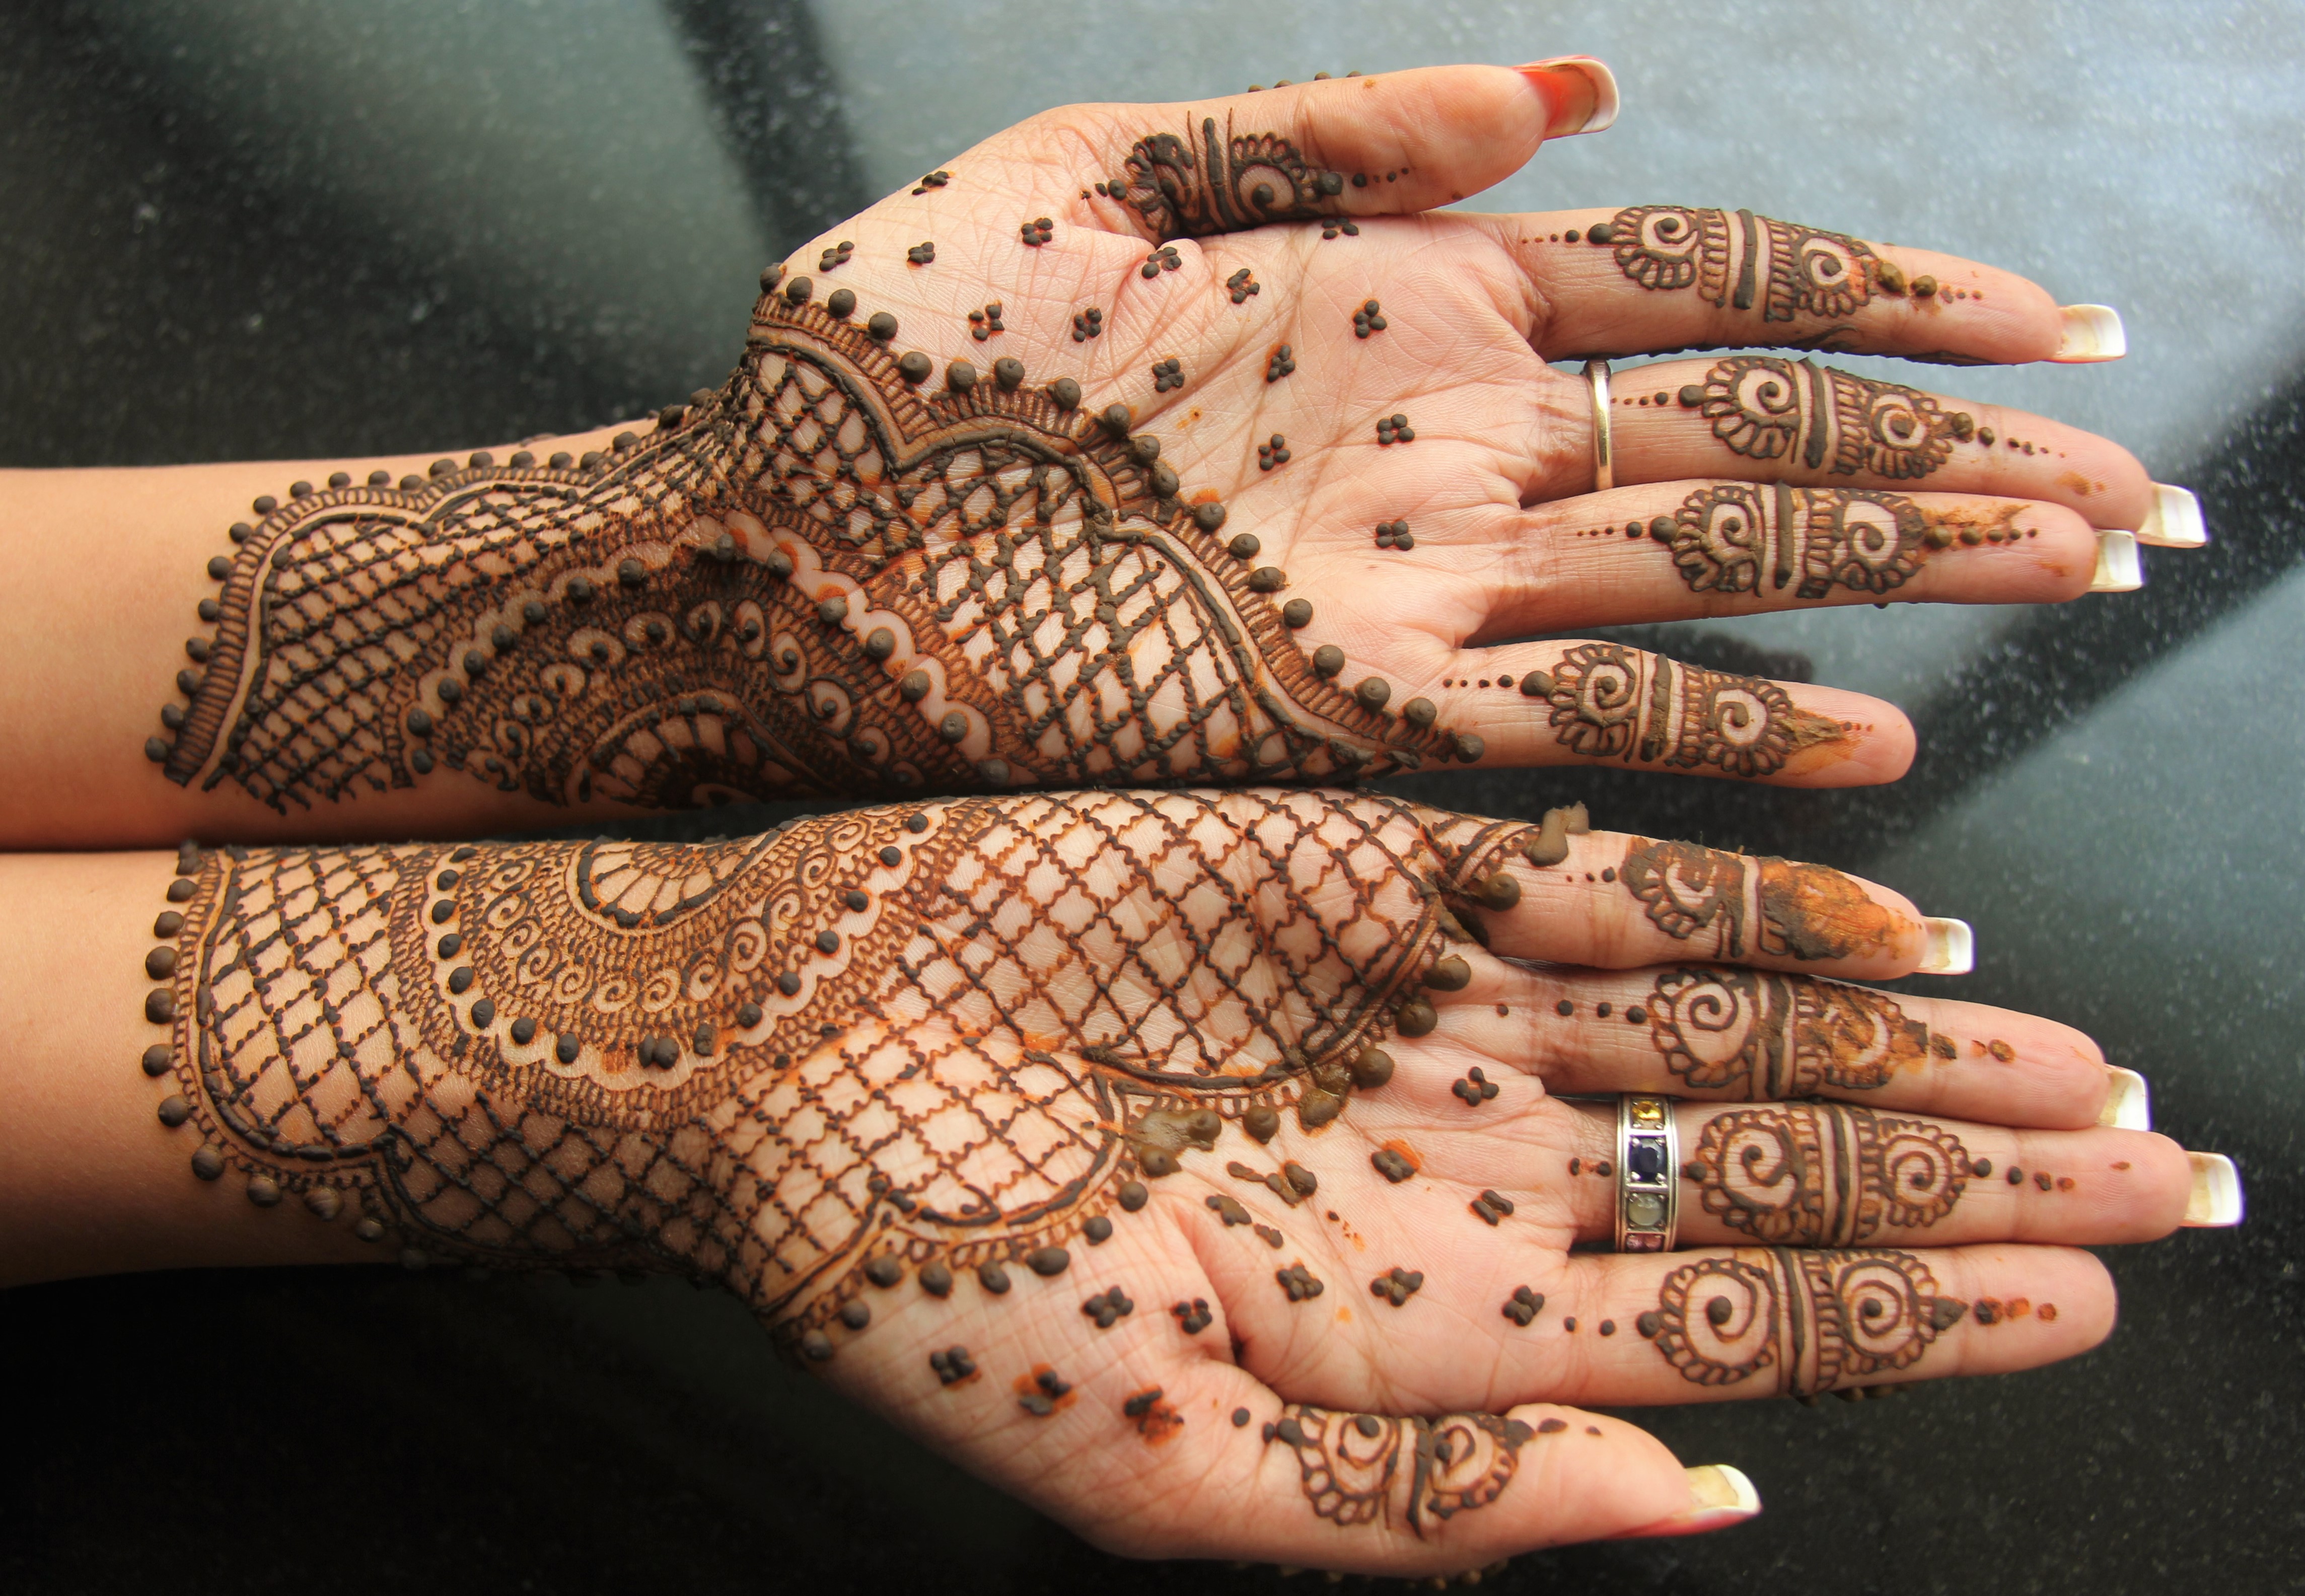 Book These Top Indian Mehendi Artists For Stunning Mehendi Designs